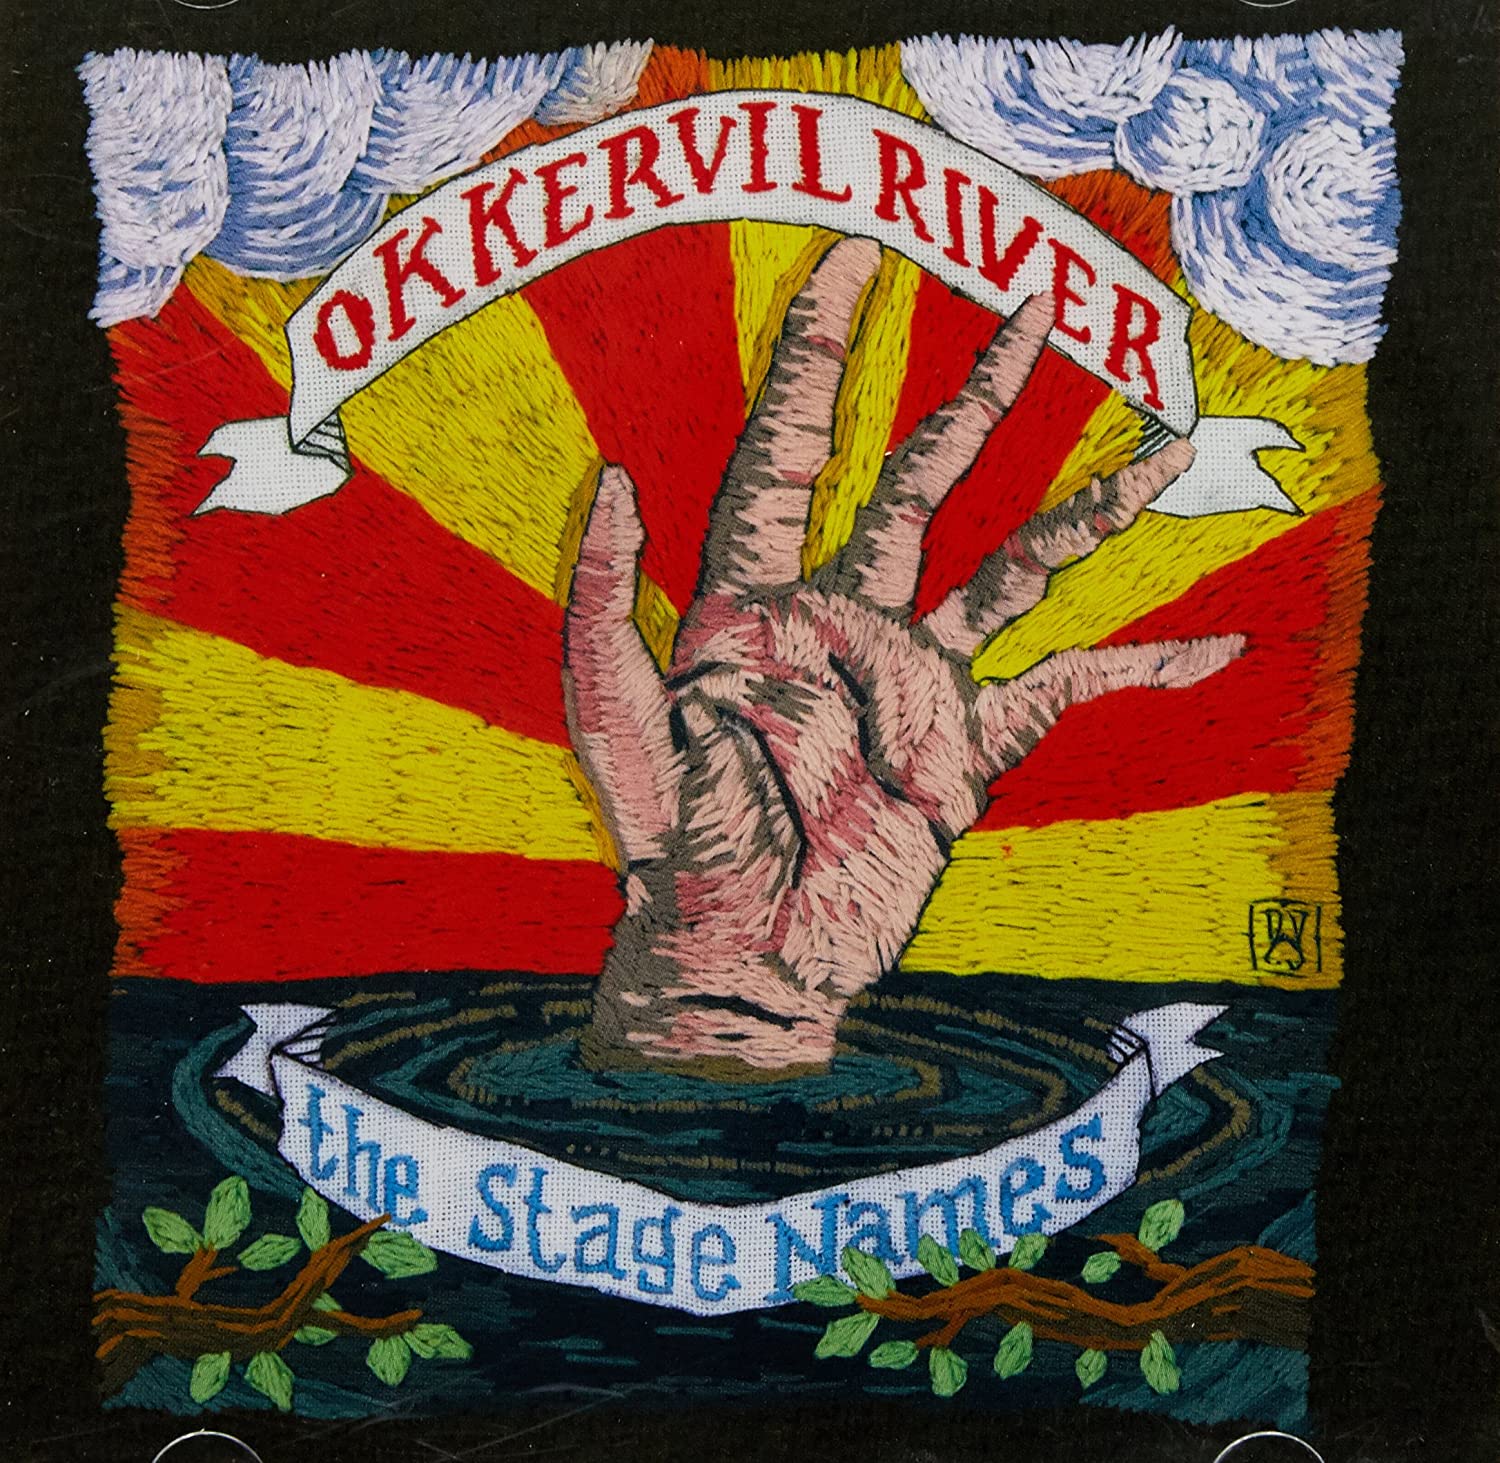 Okkervil River Released “The Stage Names” 15 Years Ago Today